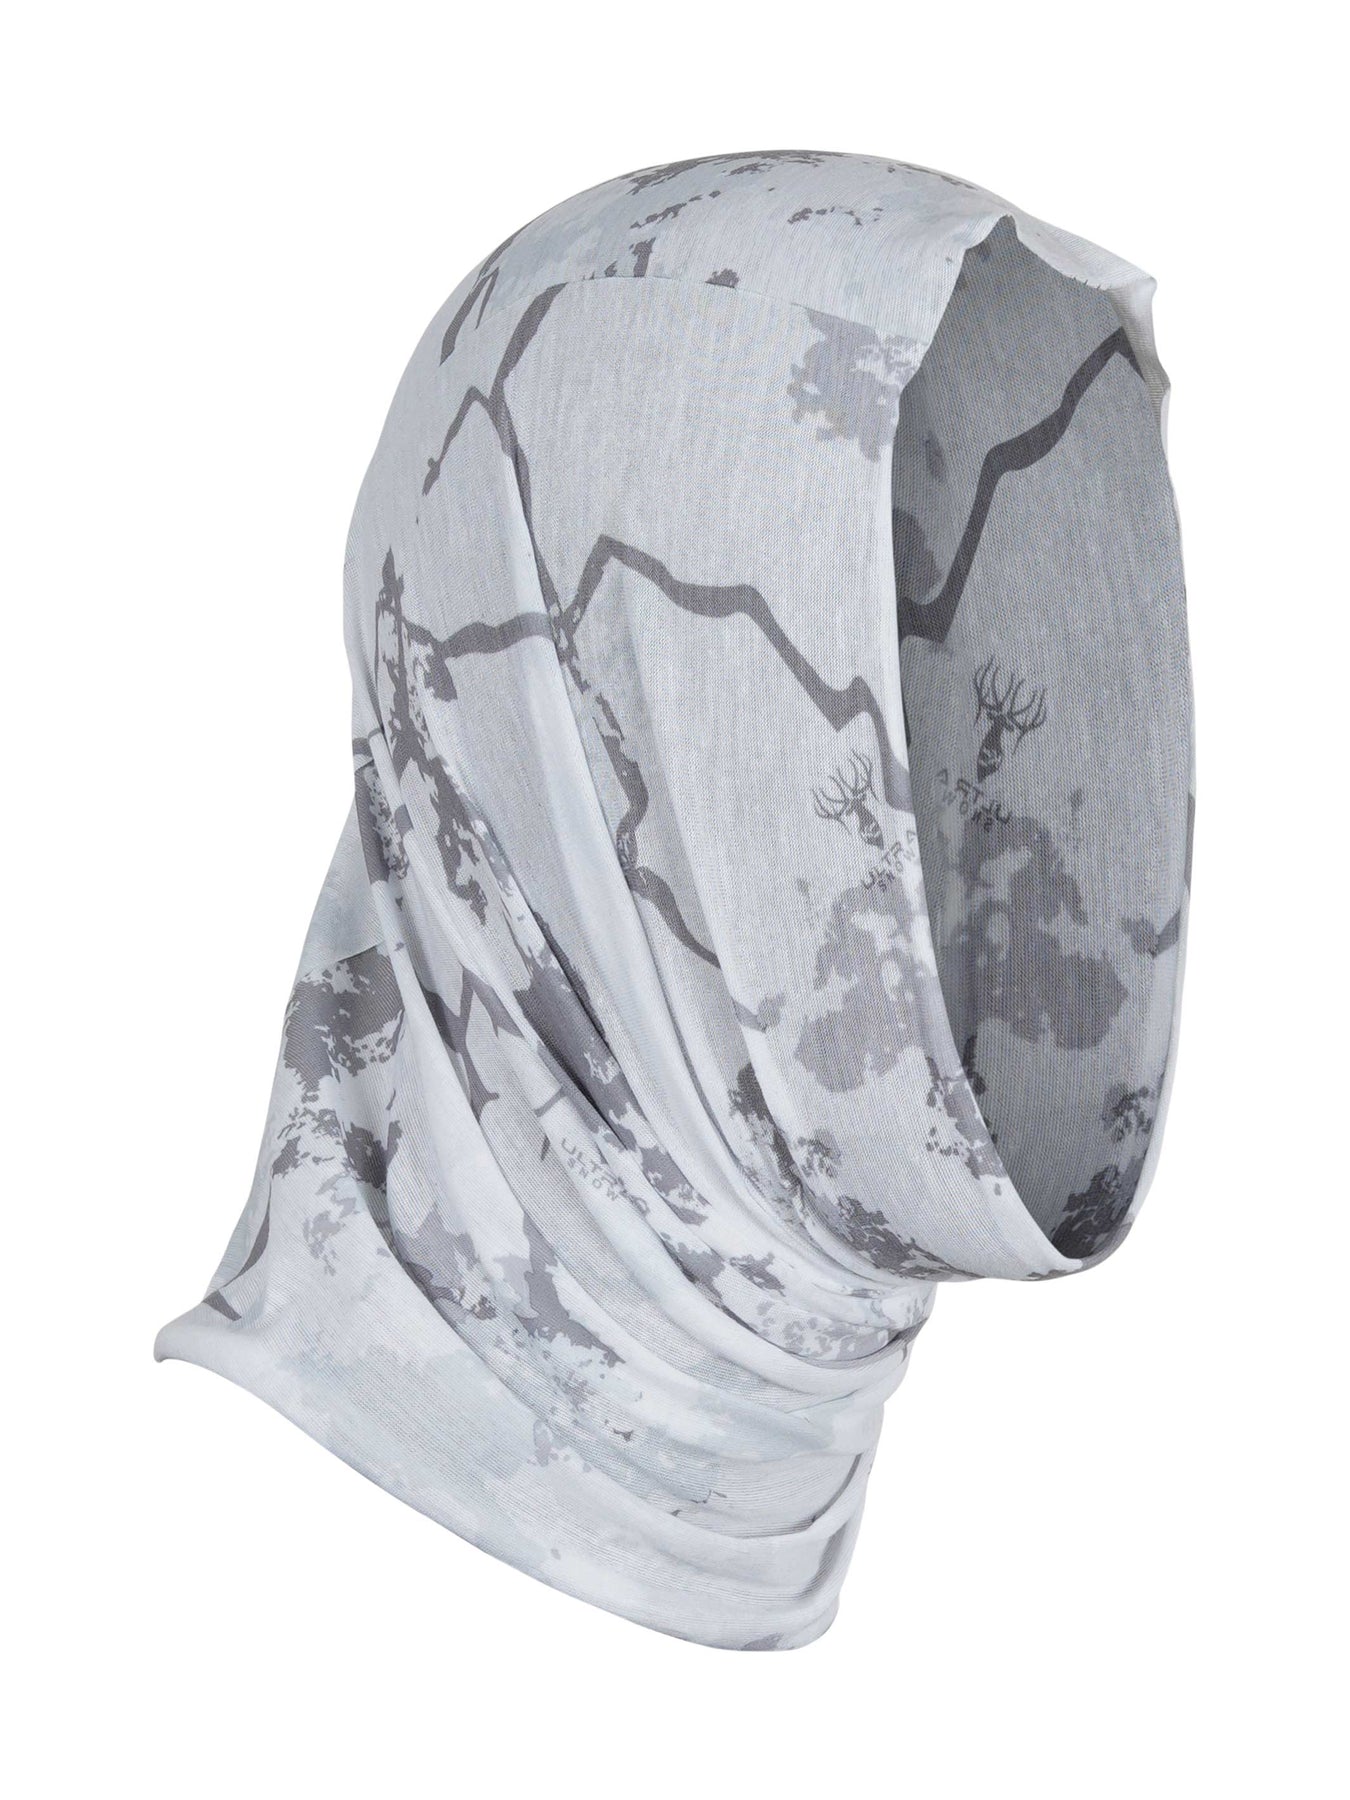 Head and Neck Gaiter in KC Ultra Snow | King's Camo